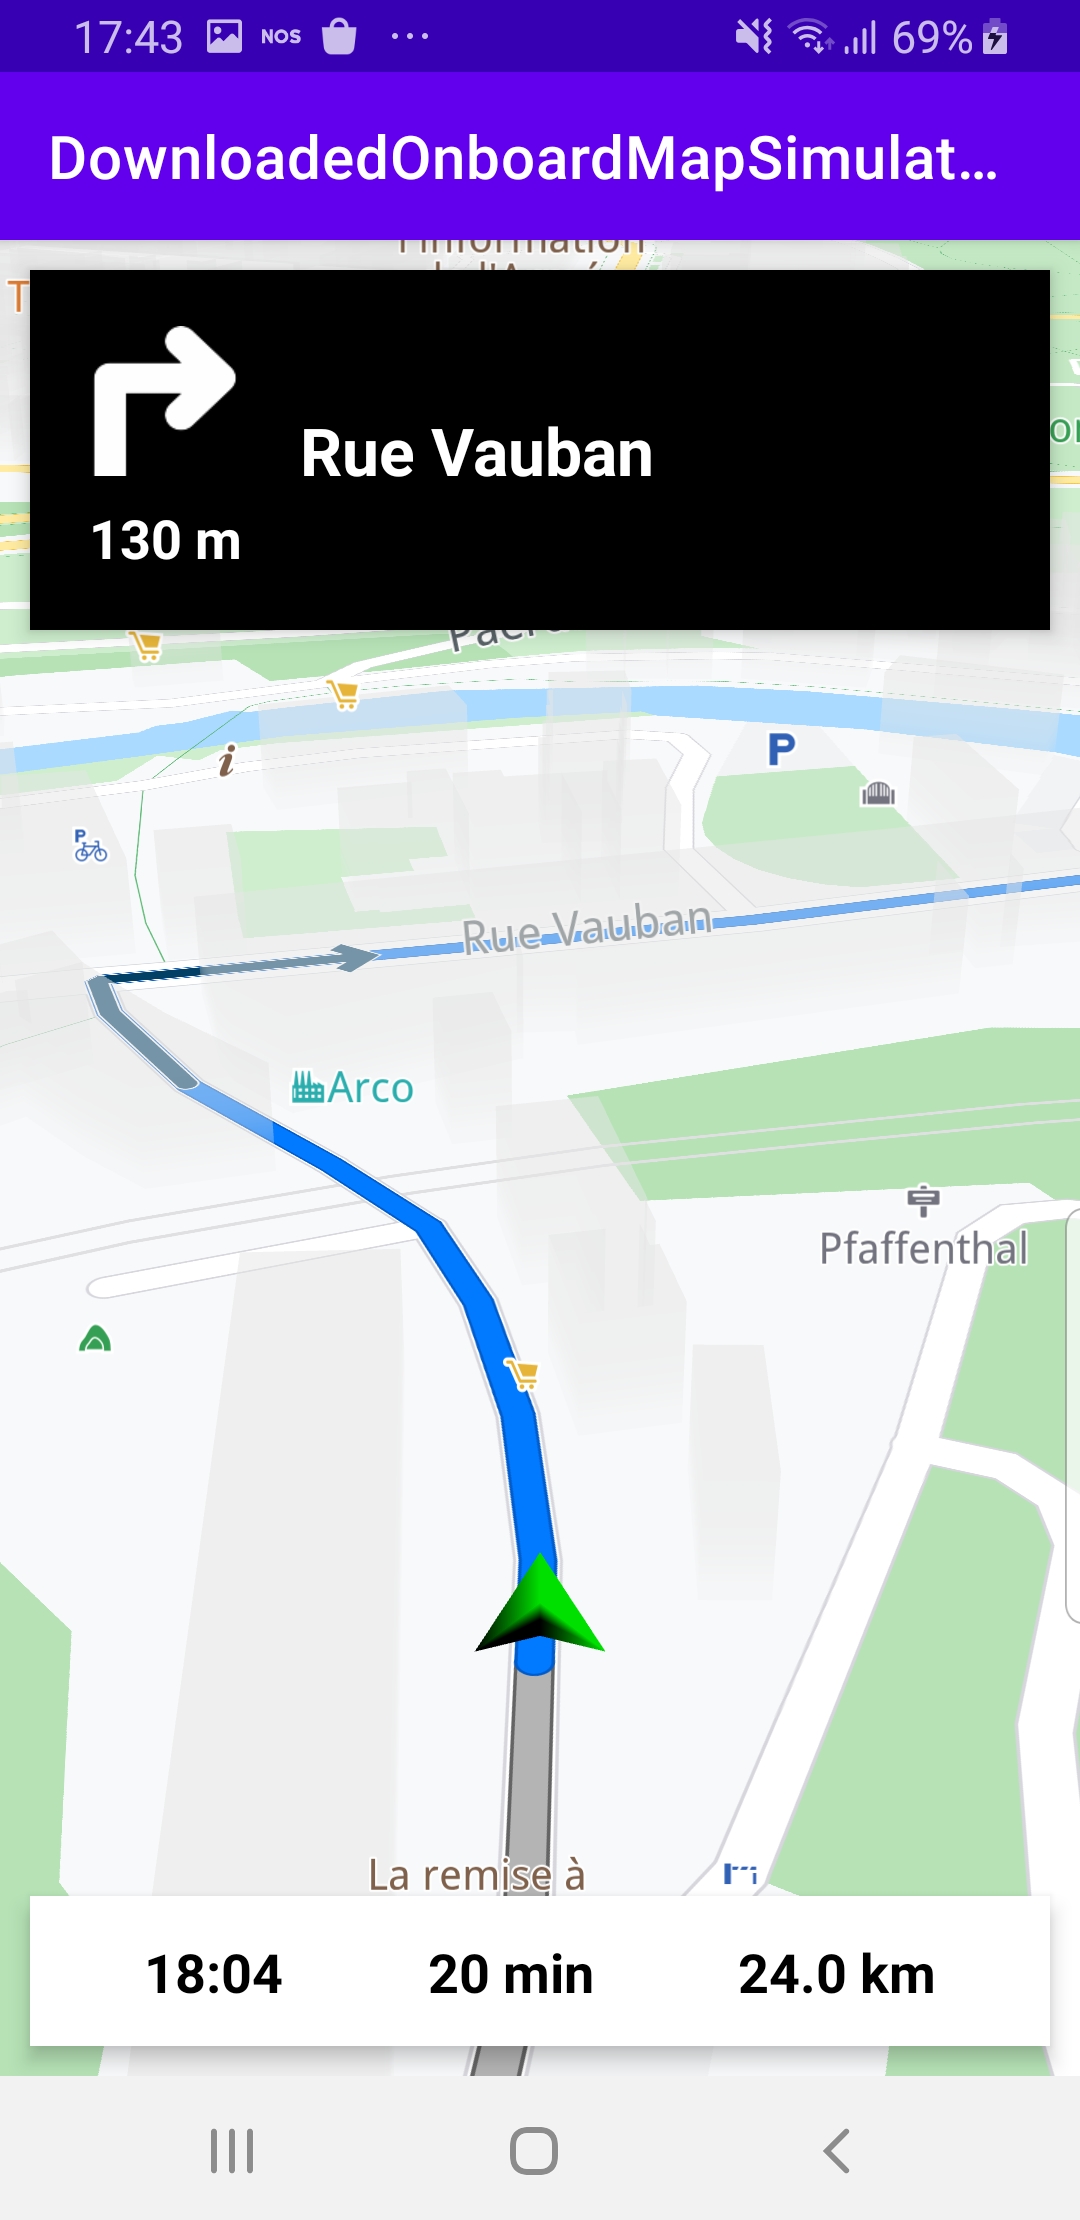 Map download example Android screenshot